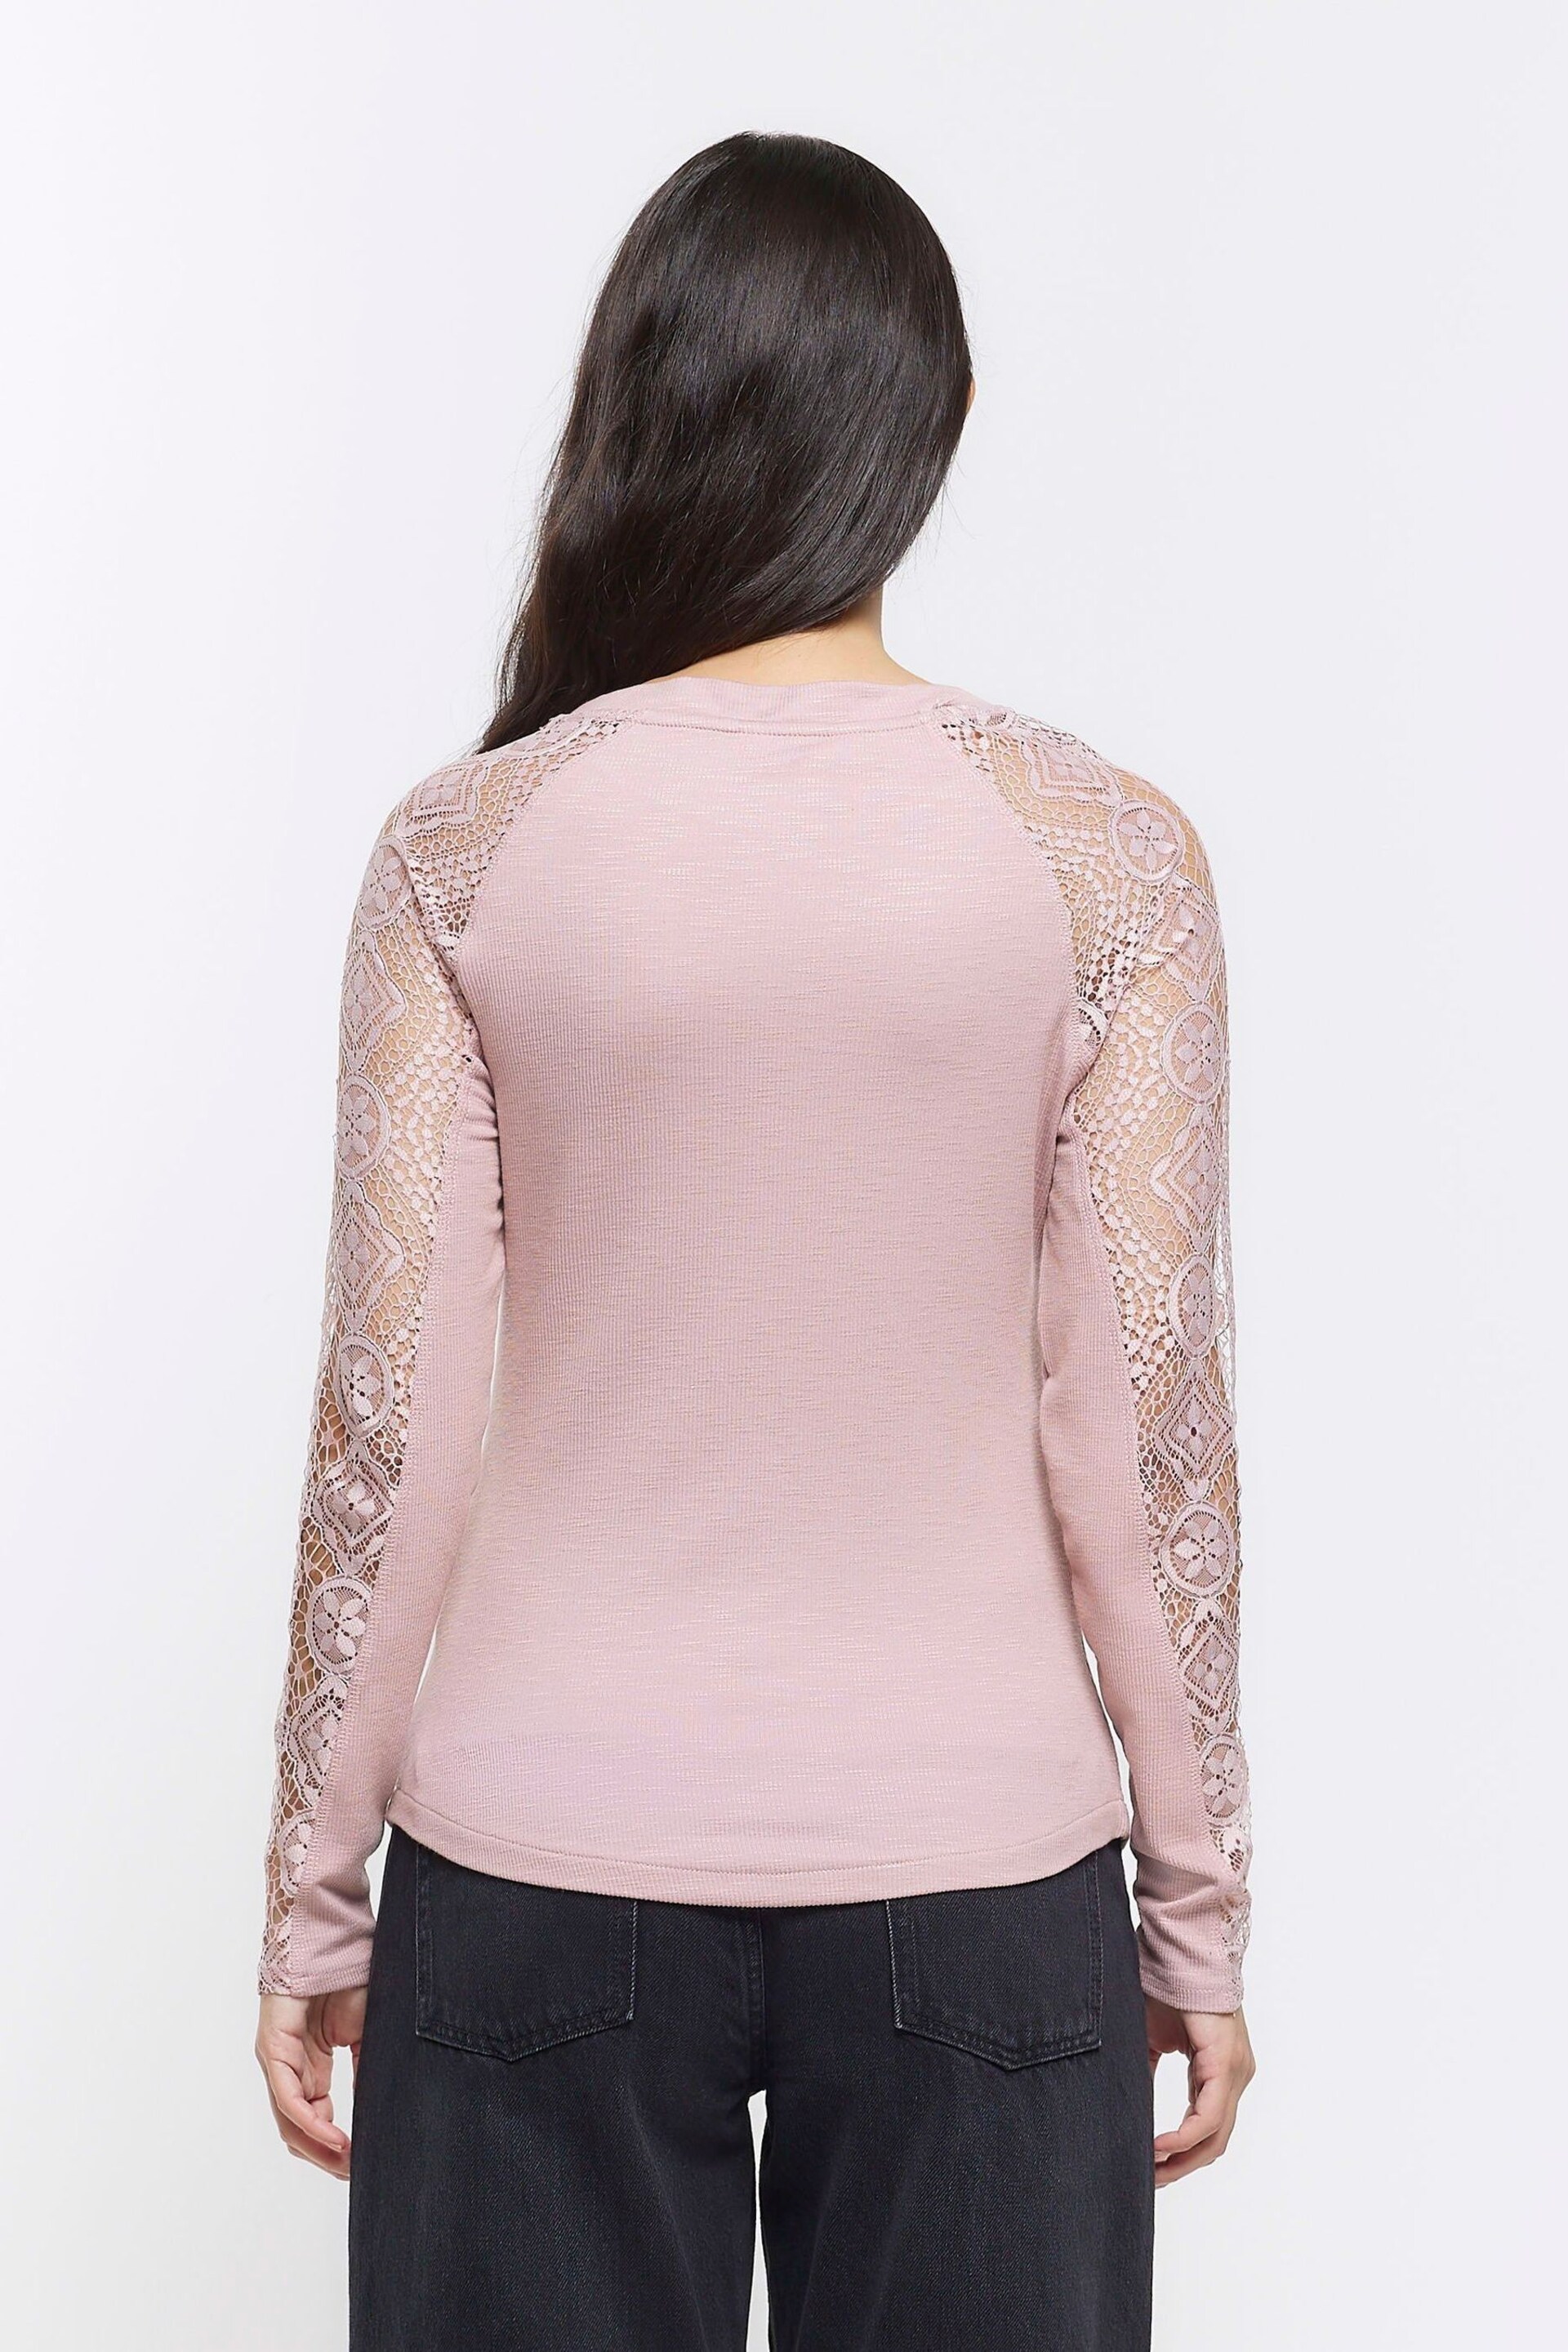 River Island Pink Lace Sleeve Detail  Long Sleeve Top - Image 2 of 4